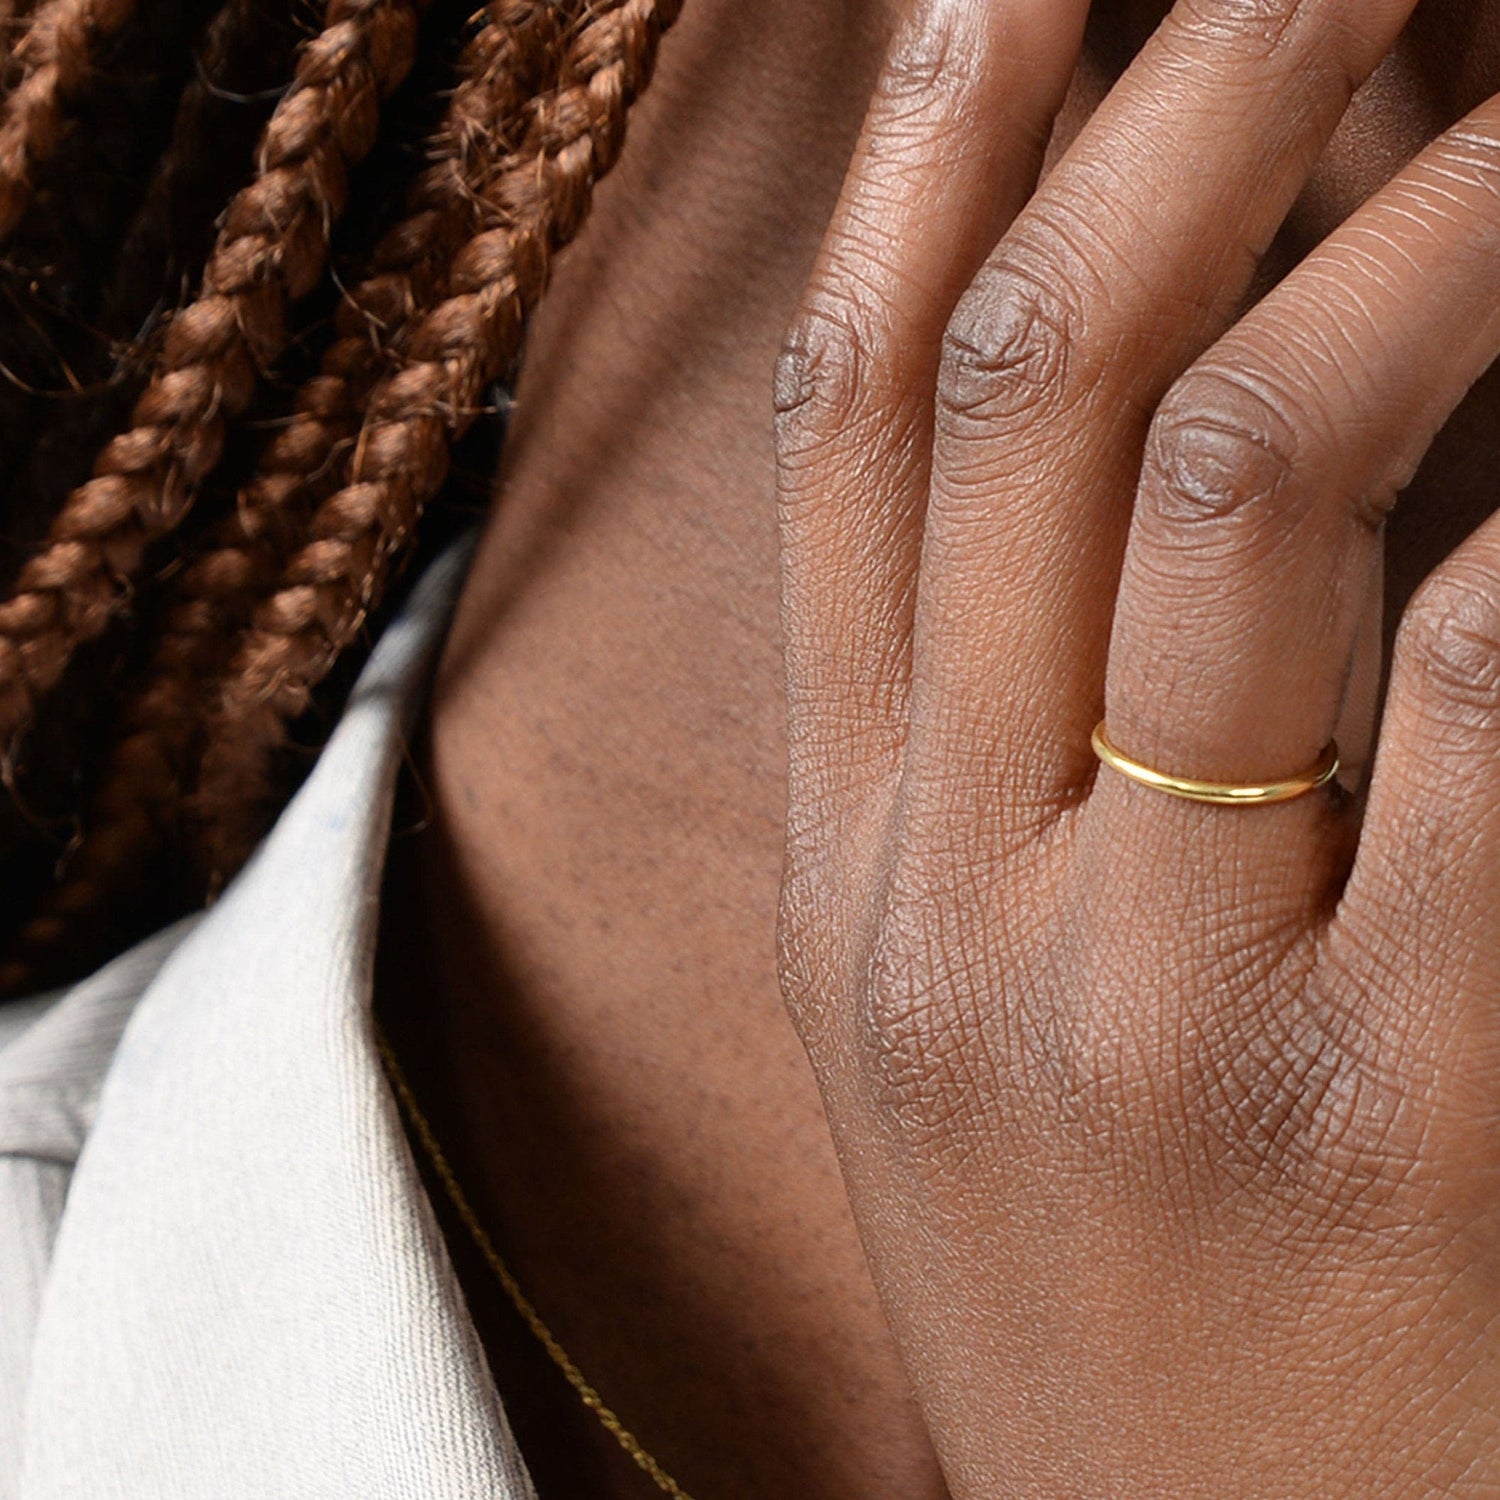 Gold Ring / Stackable Ring / Thin Ring / Solid Gold Ring / Dainty Ring / Stacking Rings / Rings / Gold Ring / Thin Gold Ring / Stack Ring